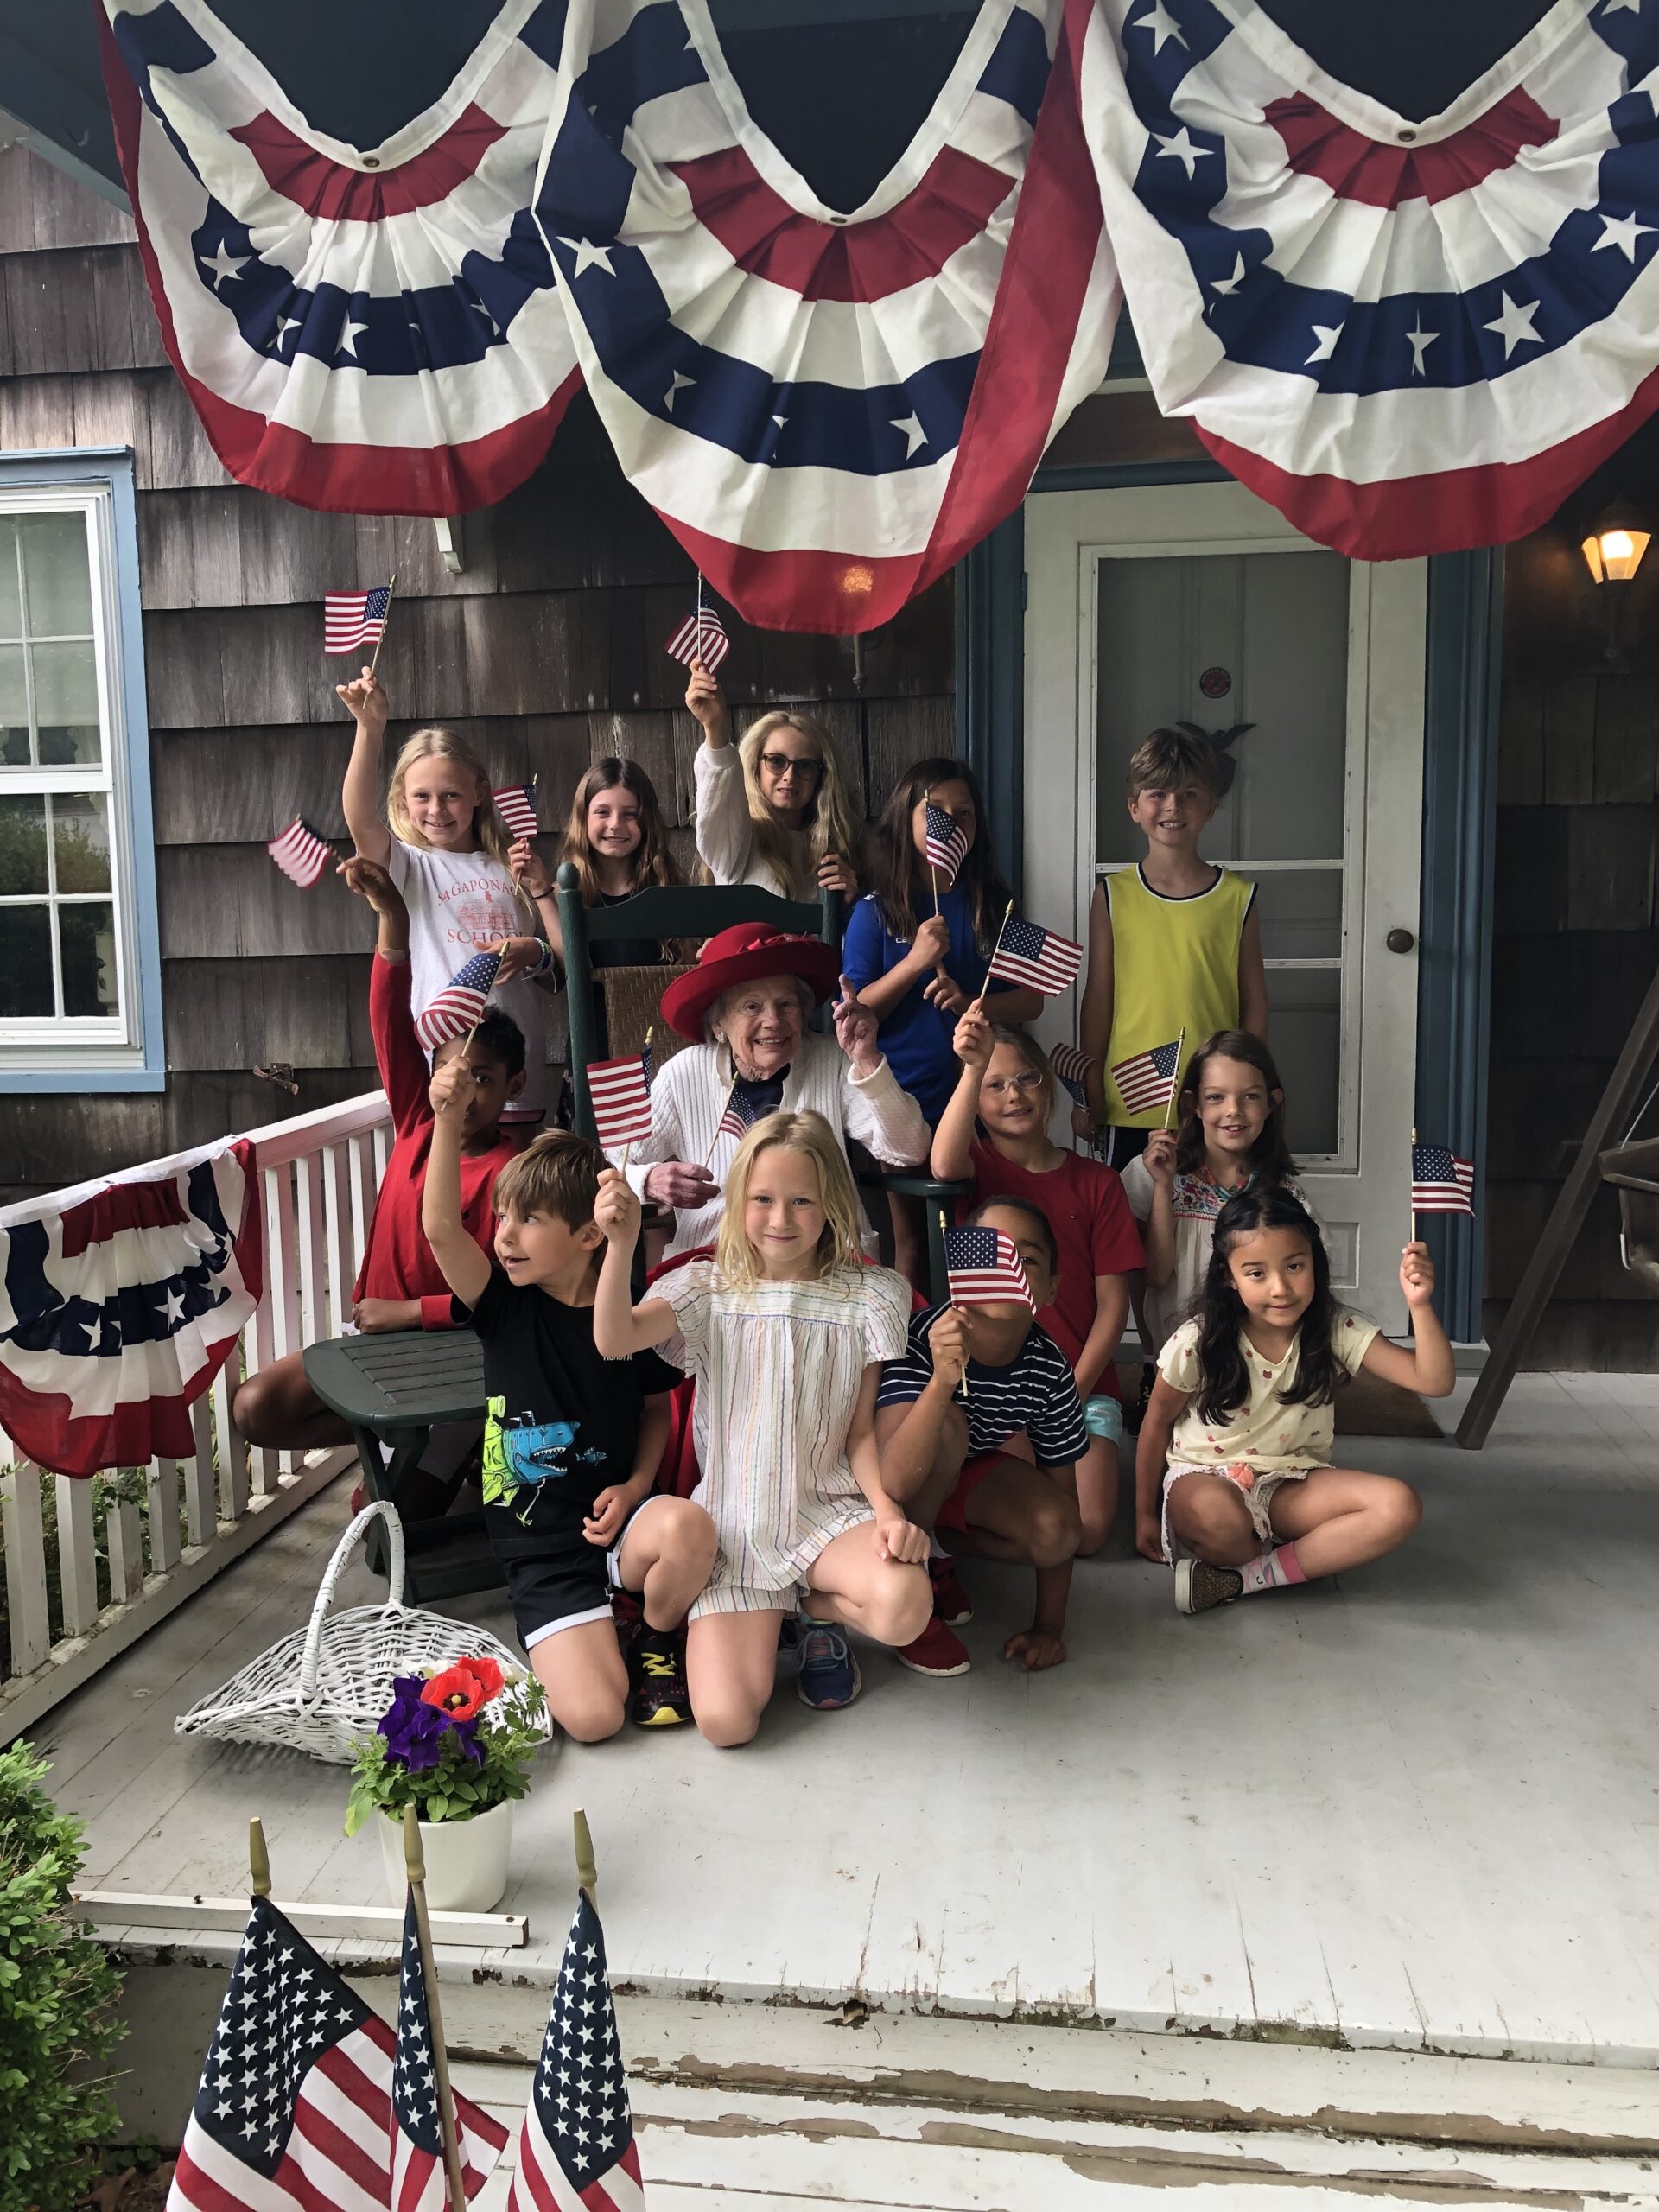 Students from the Sagaponack School gathered, as they do every year, on the porch of Barbara Albright, a longtime resident of Sagaponack and the school's best cheerleader, to sing patriotic songs an recite the pledge of allegiance for Flag Day. Albright's house is one of the oldest homes in Sagaponack; it was built in the 1700s. COURTESY SAGAPONACK SCHOOL